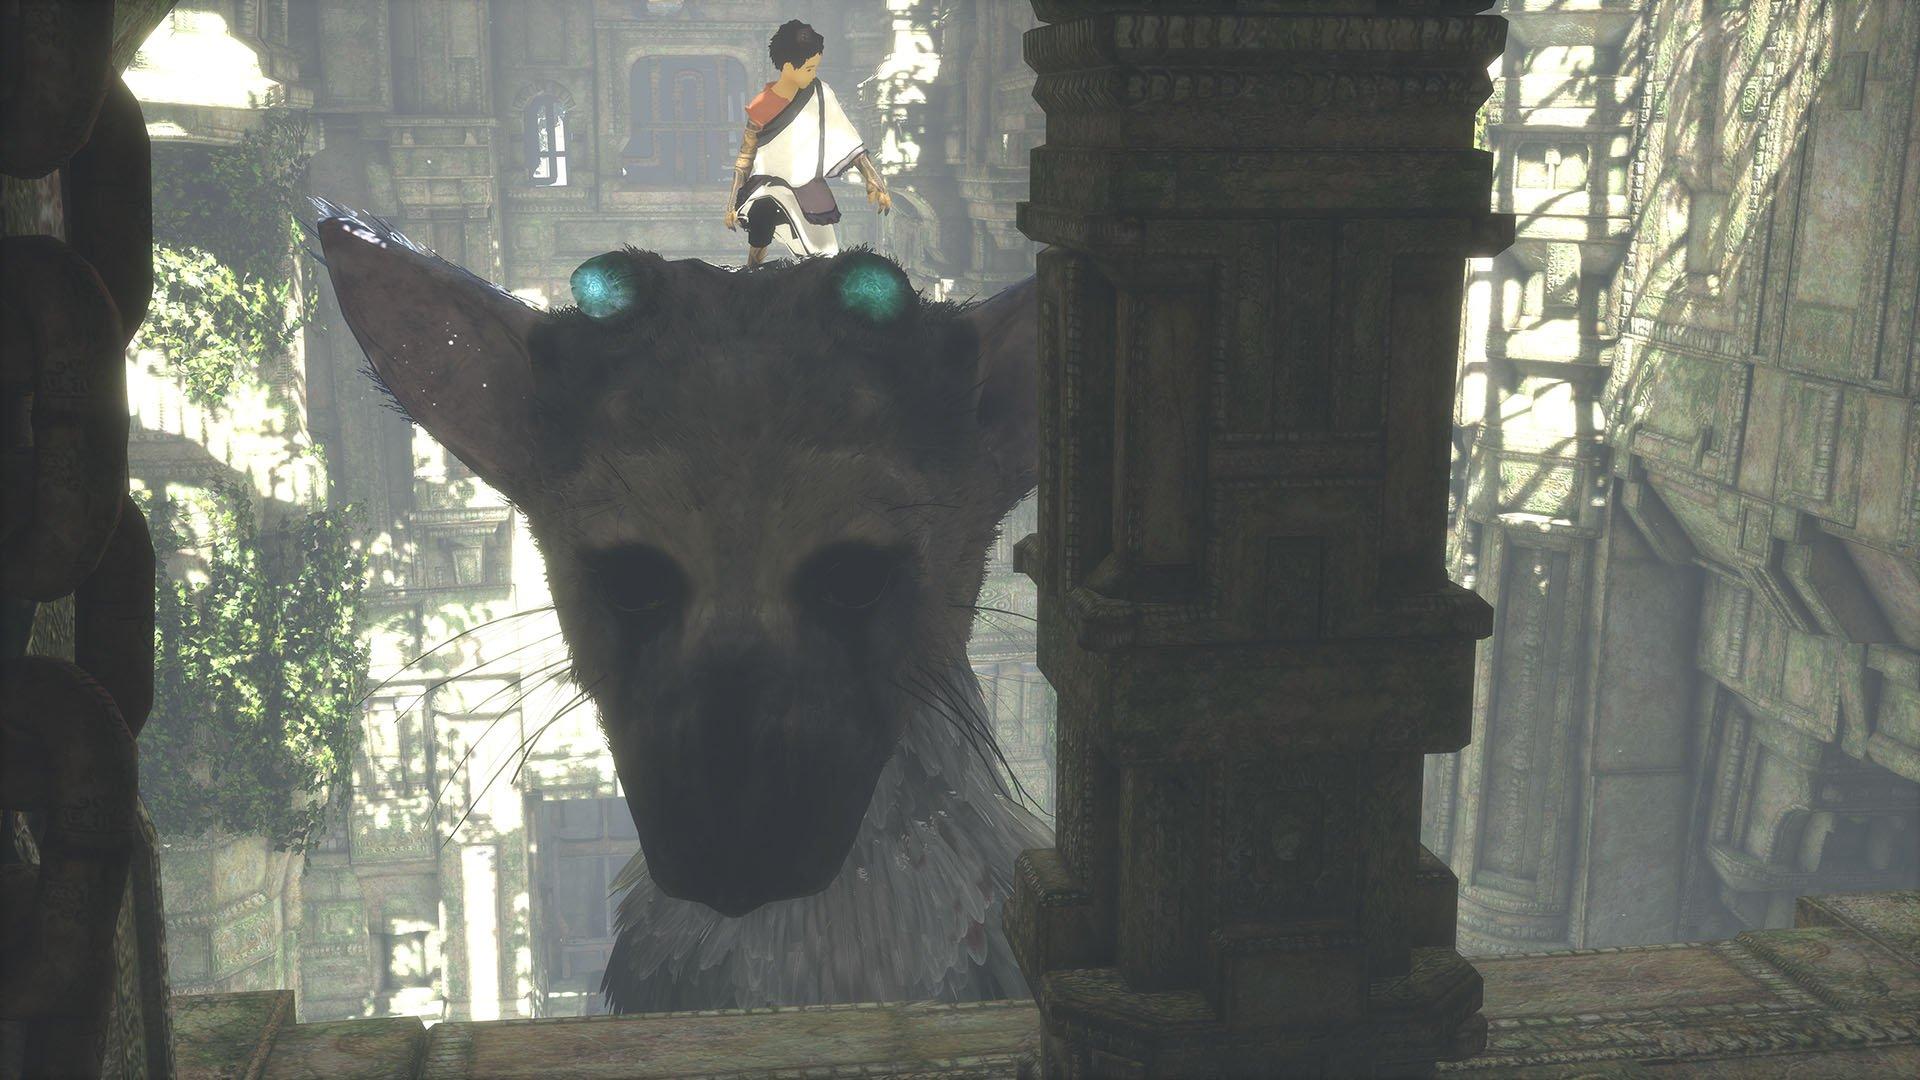 The Last Guardian coming to PS4 : r/Games